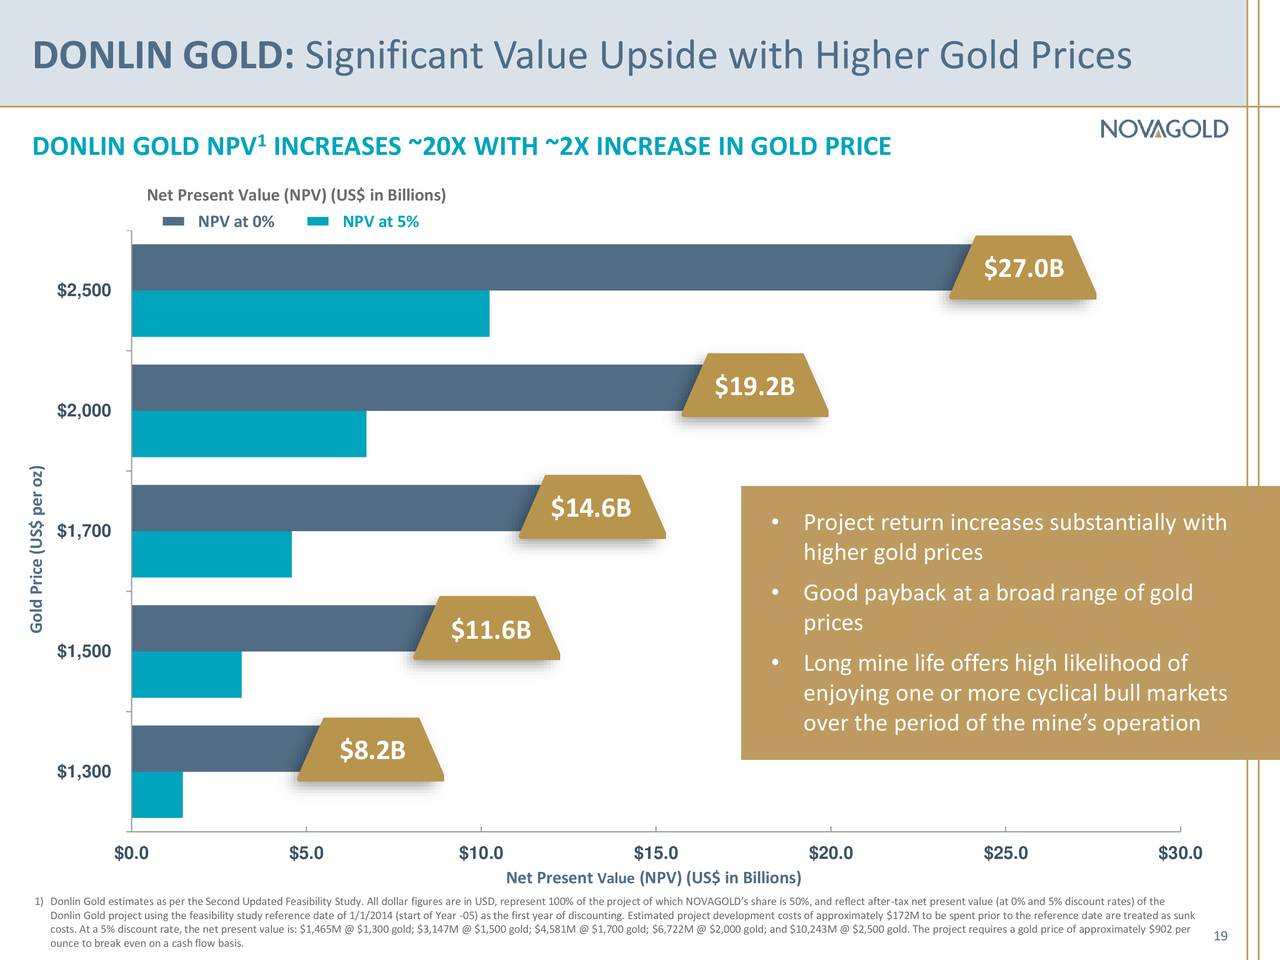 DONLIN GOLD: Significant Value Upside with Higher Gold Prices